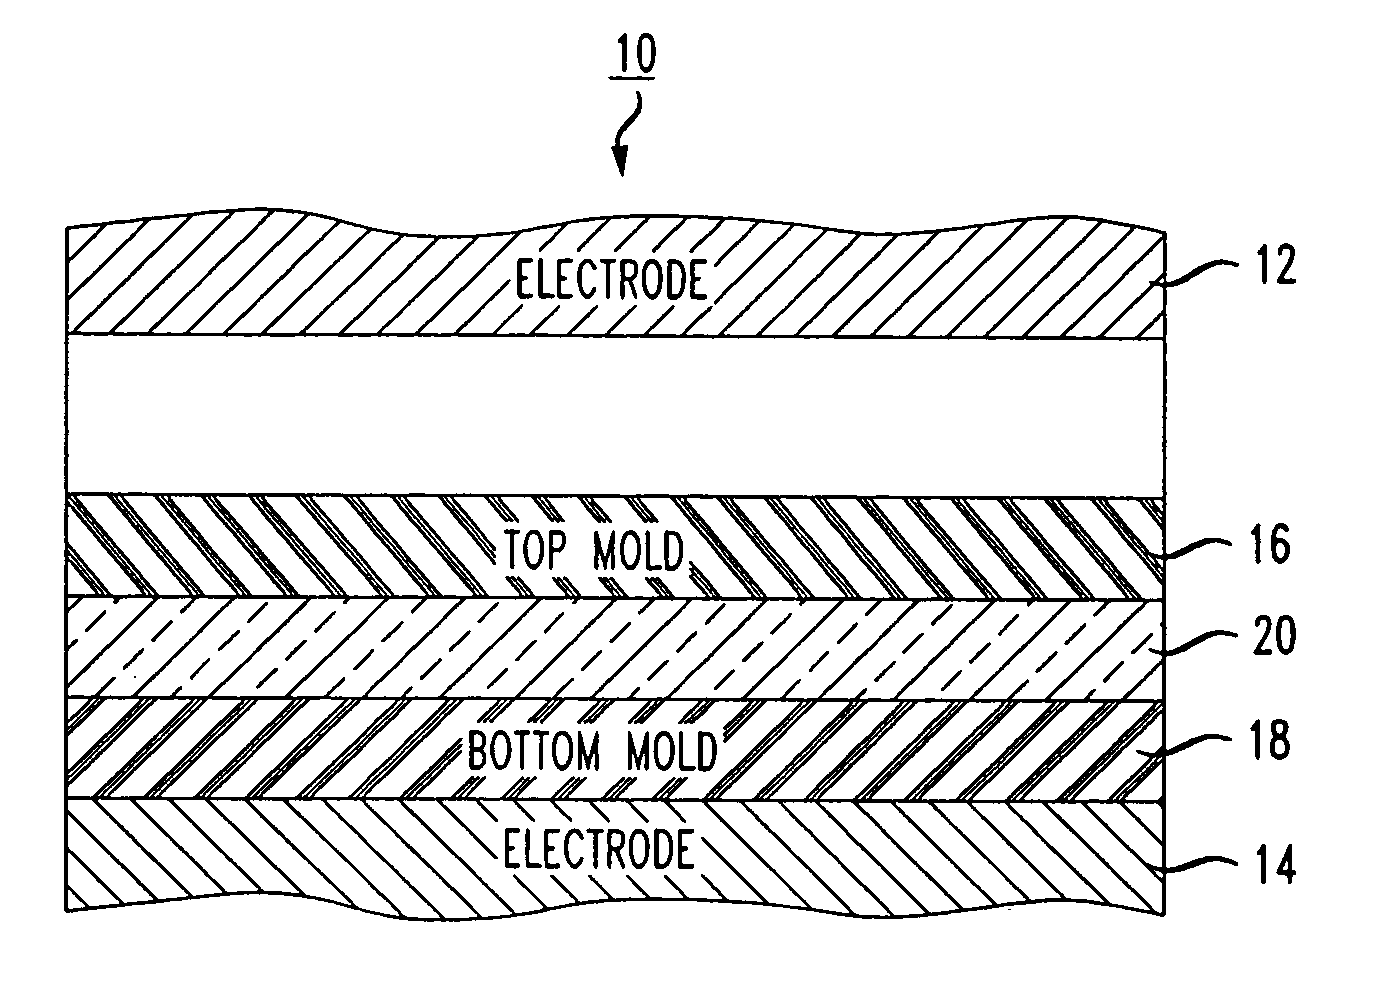 Method of forming a hardened skin on a surface of a molded article